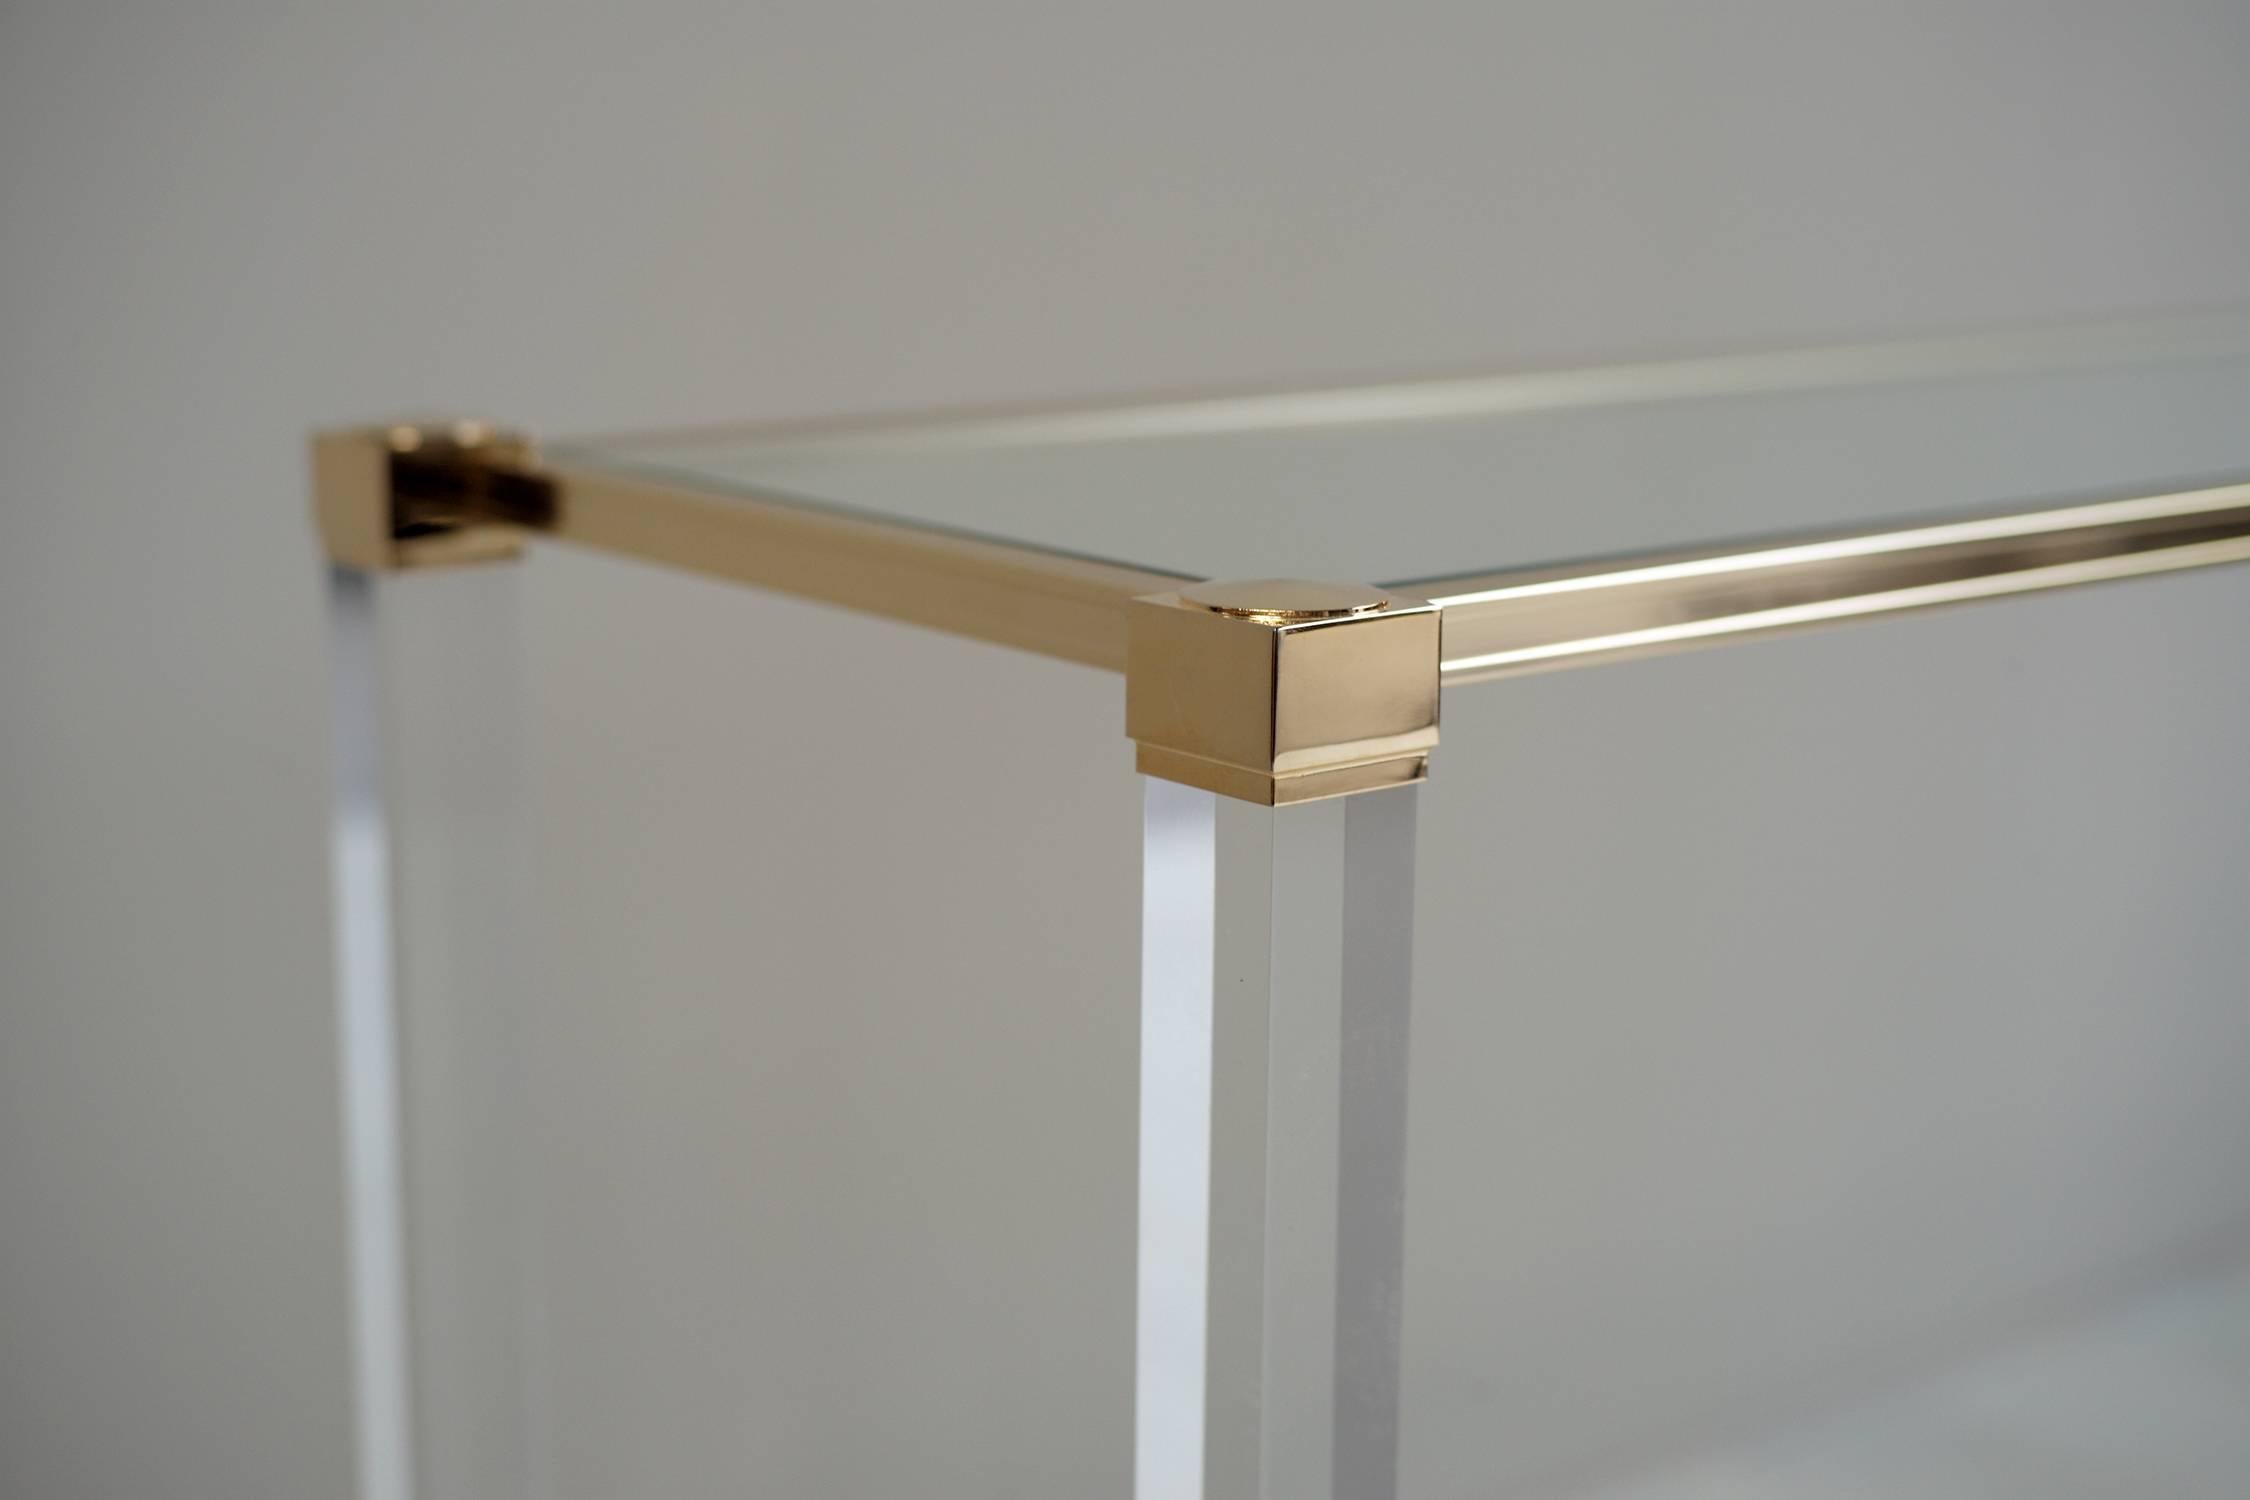 Console in plexiglass, gilt metal and glass Pierre Vandel, France 1980.
Brand new condition, signed on the top banner.
After a collaboration with the company Marais International, Pierre Vandel with the support of Pierre Cardin created his own